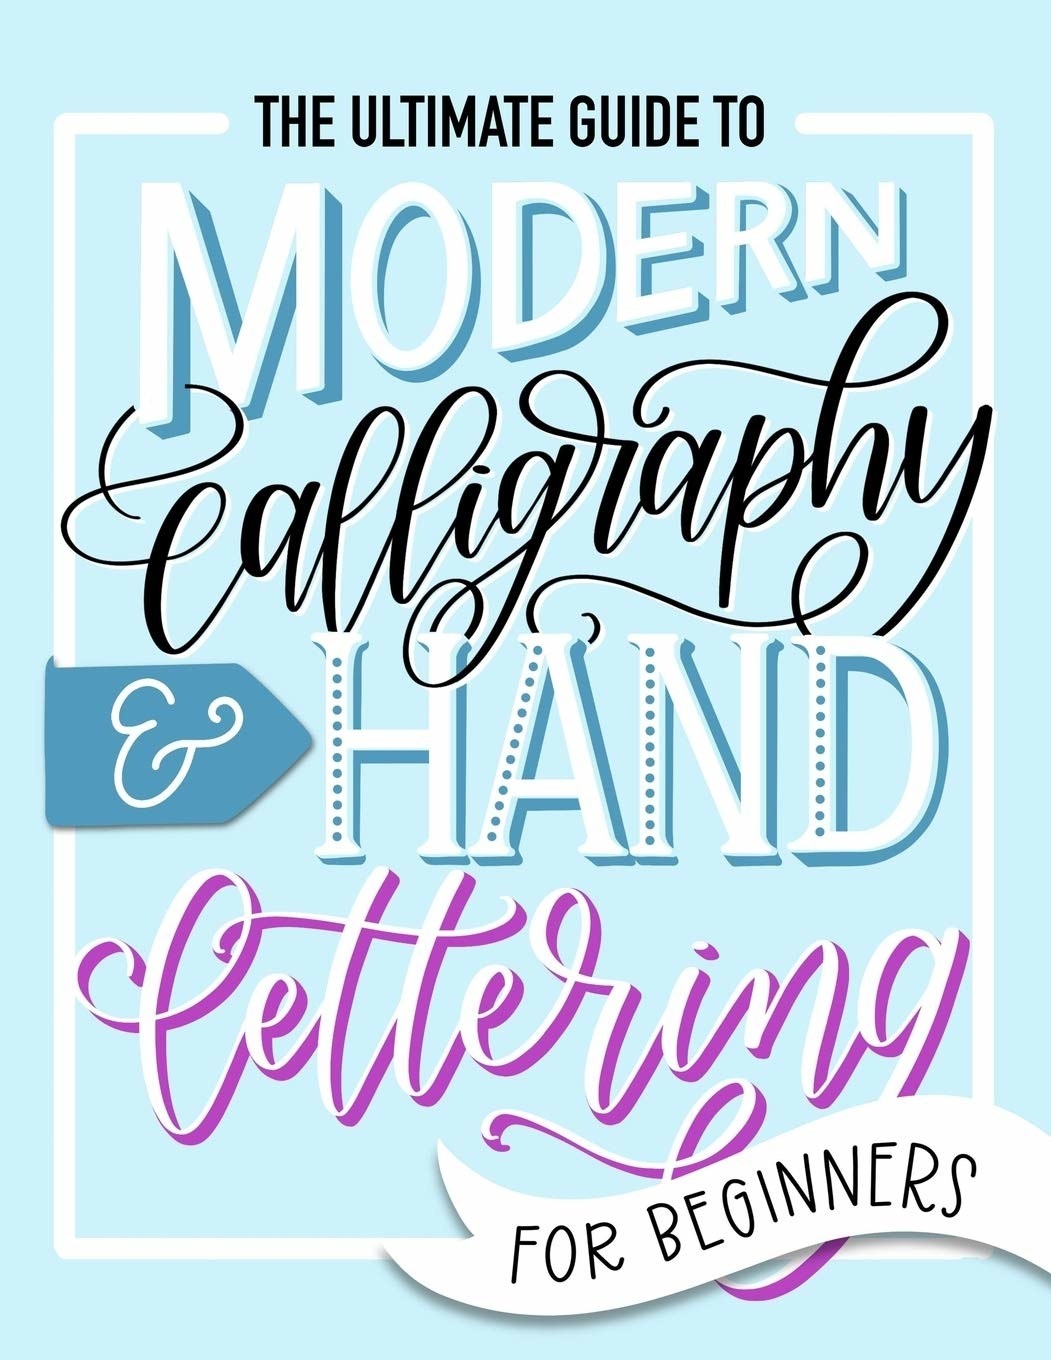 The cover of the ultimate guide to modern calligraphy